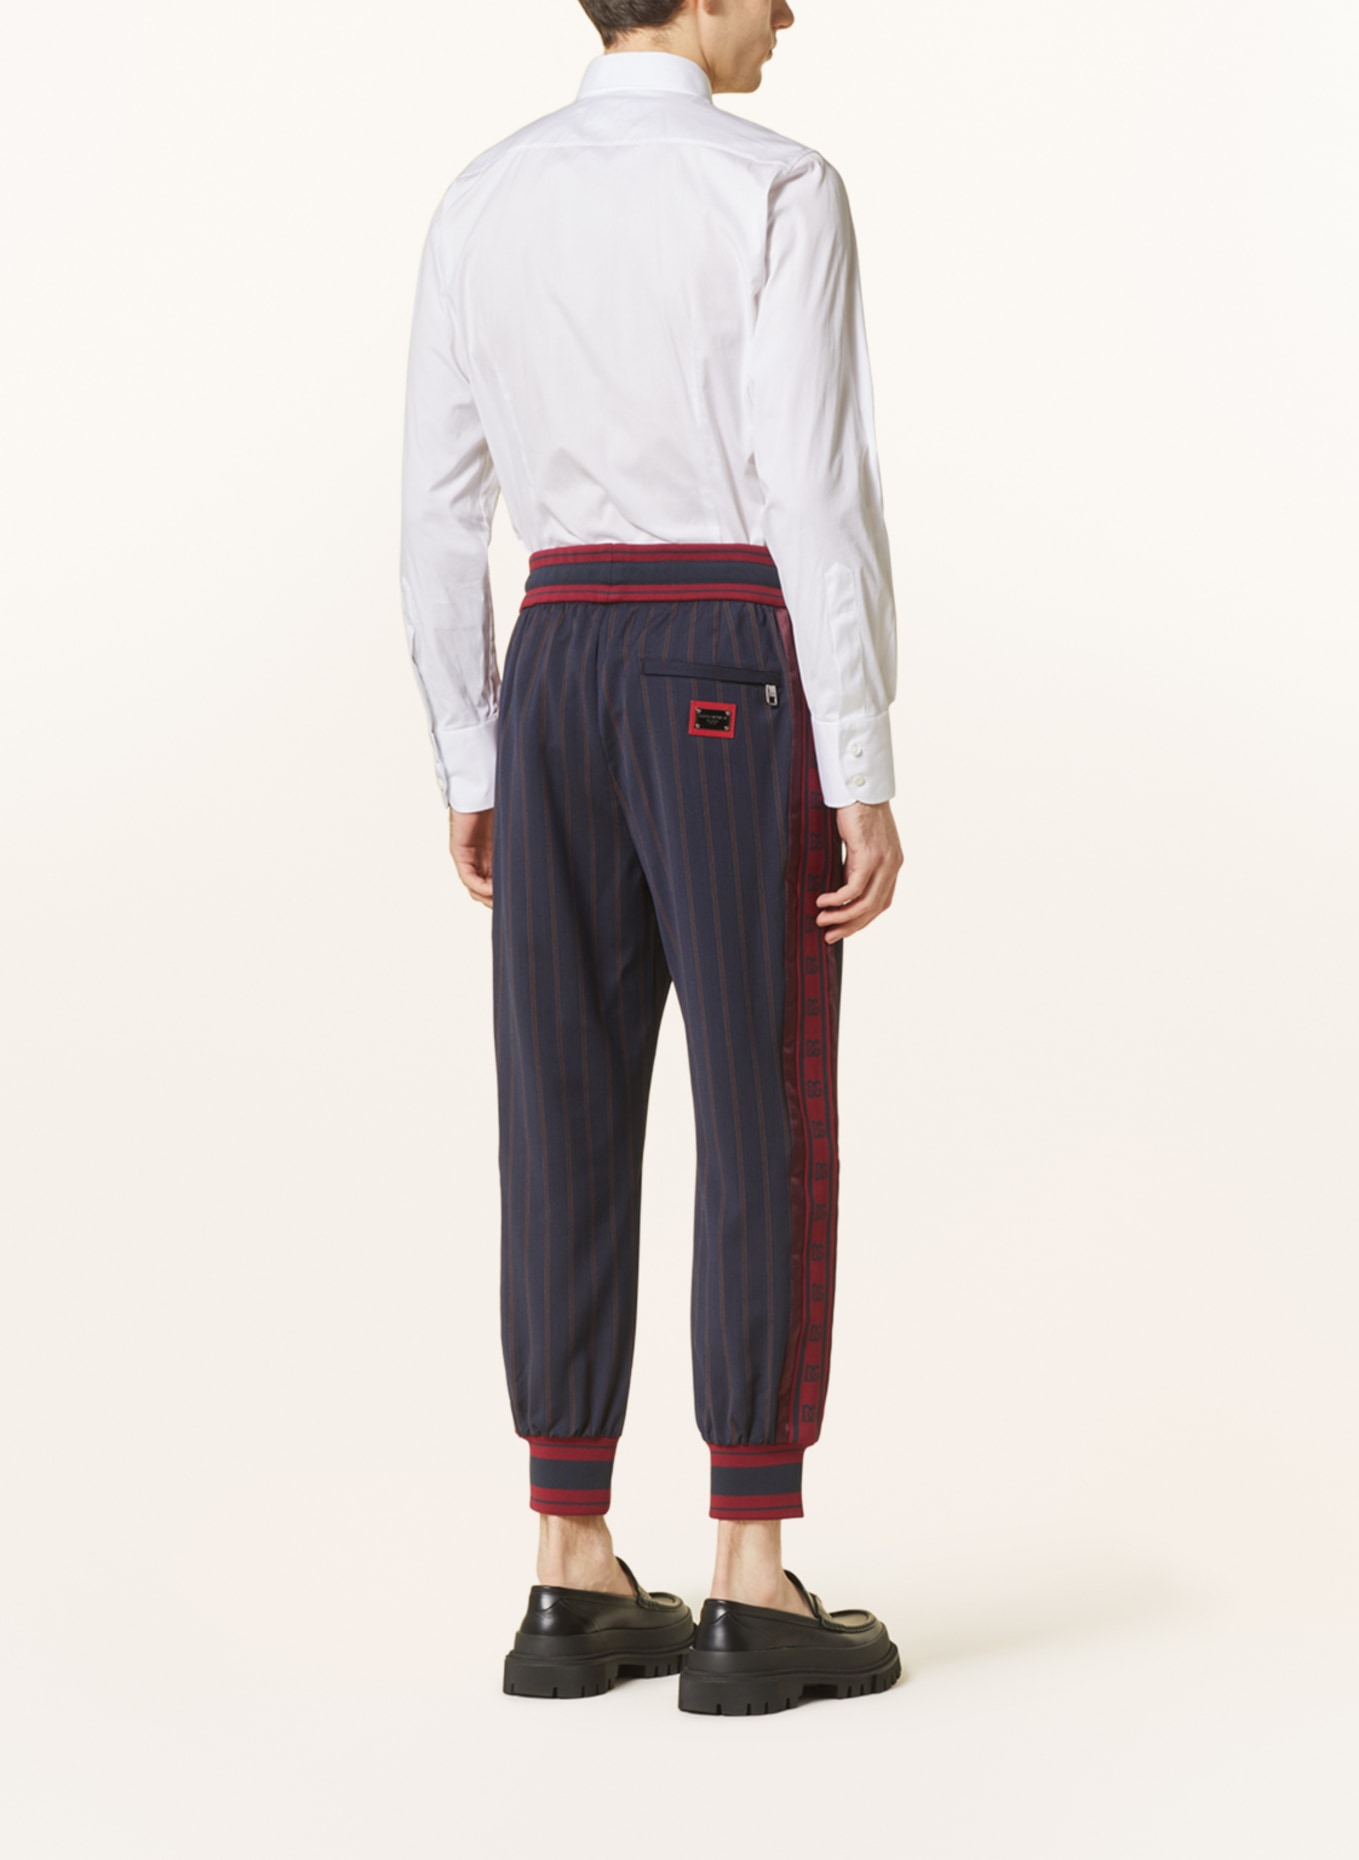 DOLCE & GABBANA Pants in jogger style with tuxedo stripes, Color: BLACK/ DARK RED (Image 3)